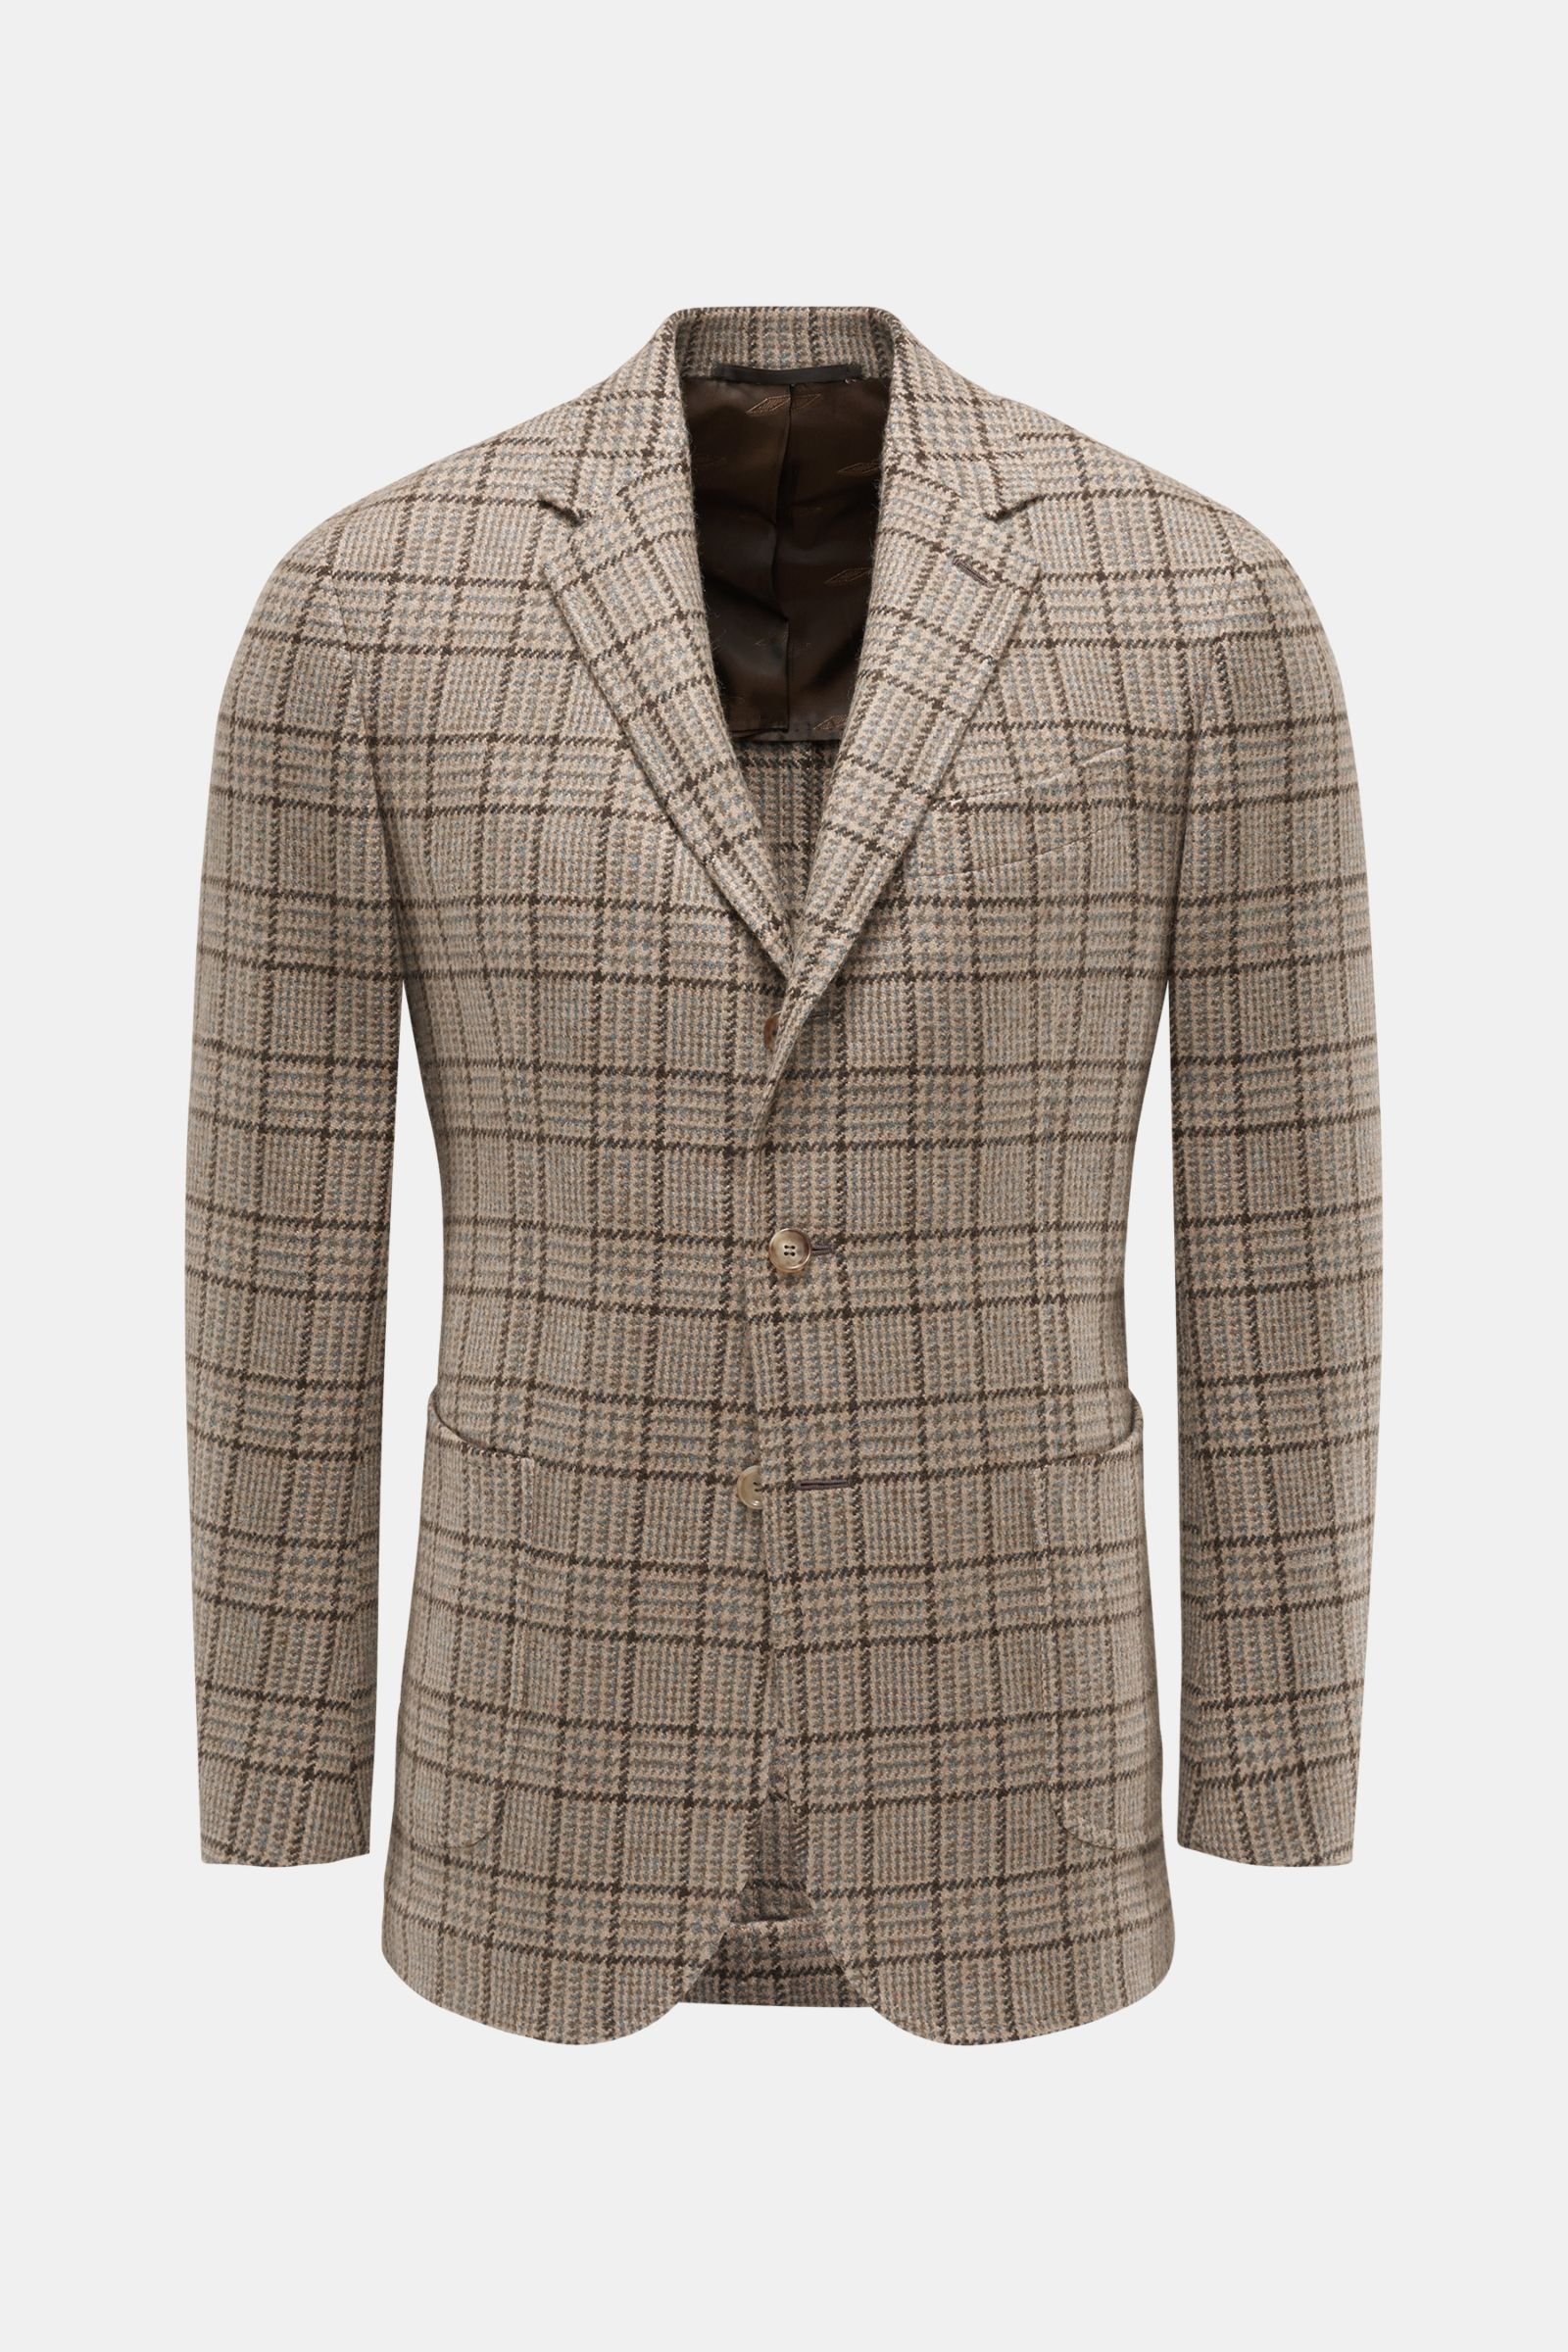 STILE LATINO smart-casual jacket 'Vincenzo' light brown checked 